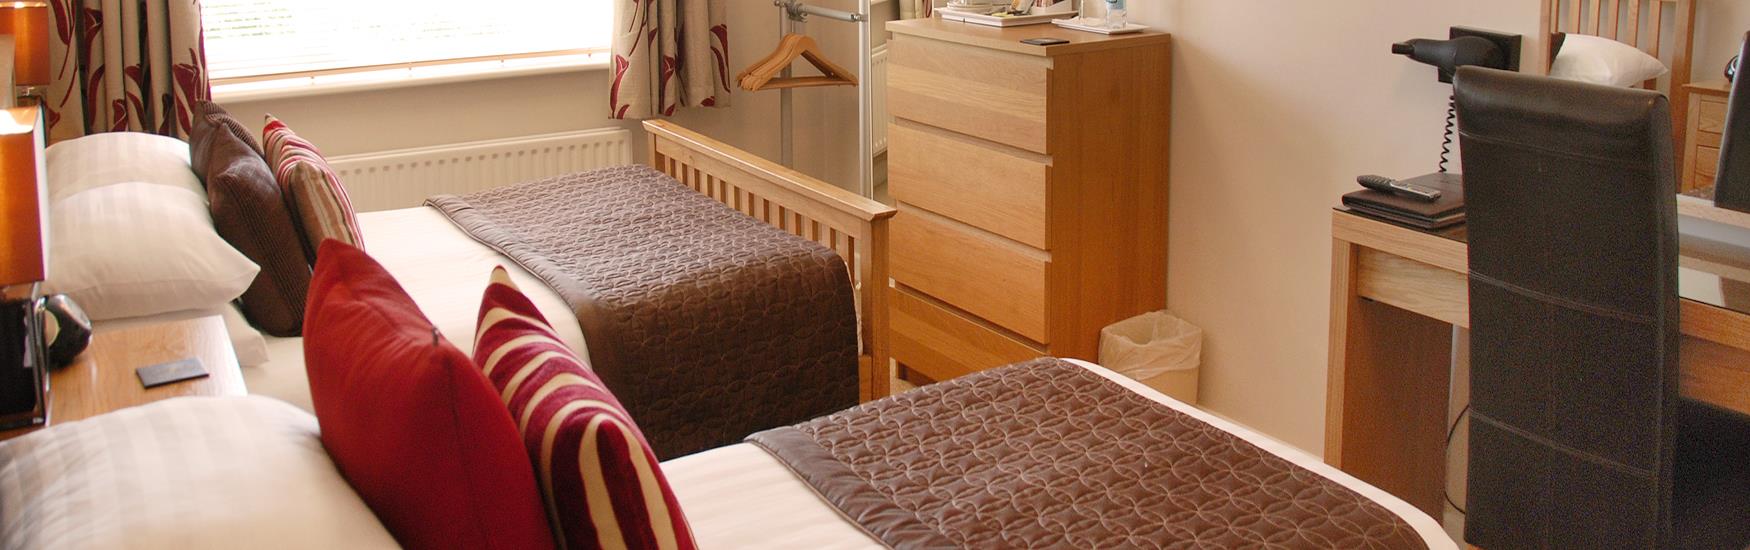 Two cosy double beds ready for guests to get comfortable at a Bed and breakfast